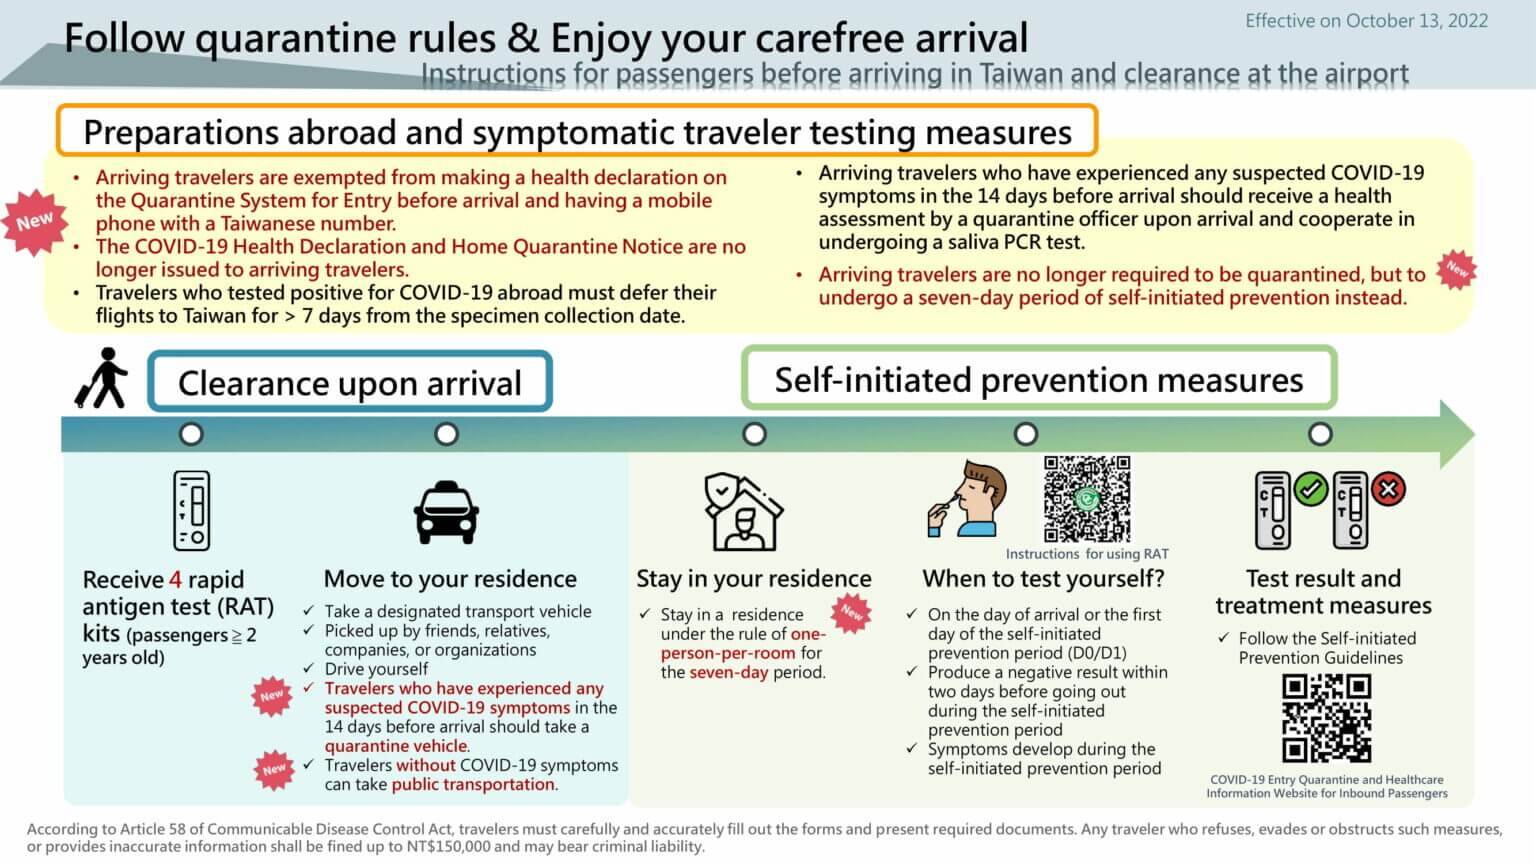 follow-quarantine-rules-enjoy-your-carefree-arrival-13-Oct-1-1-1536x864